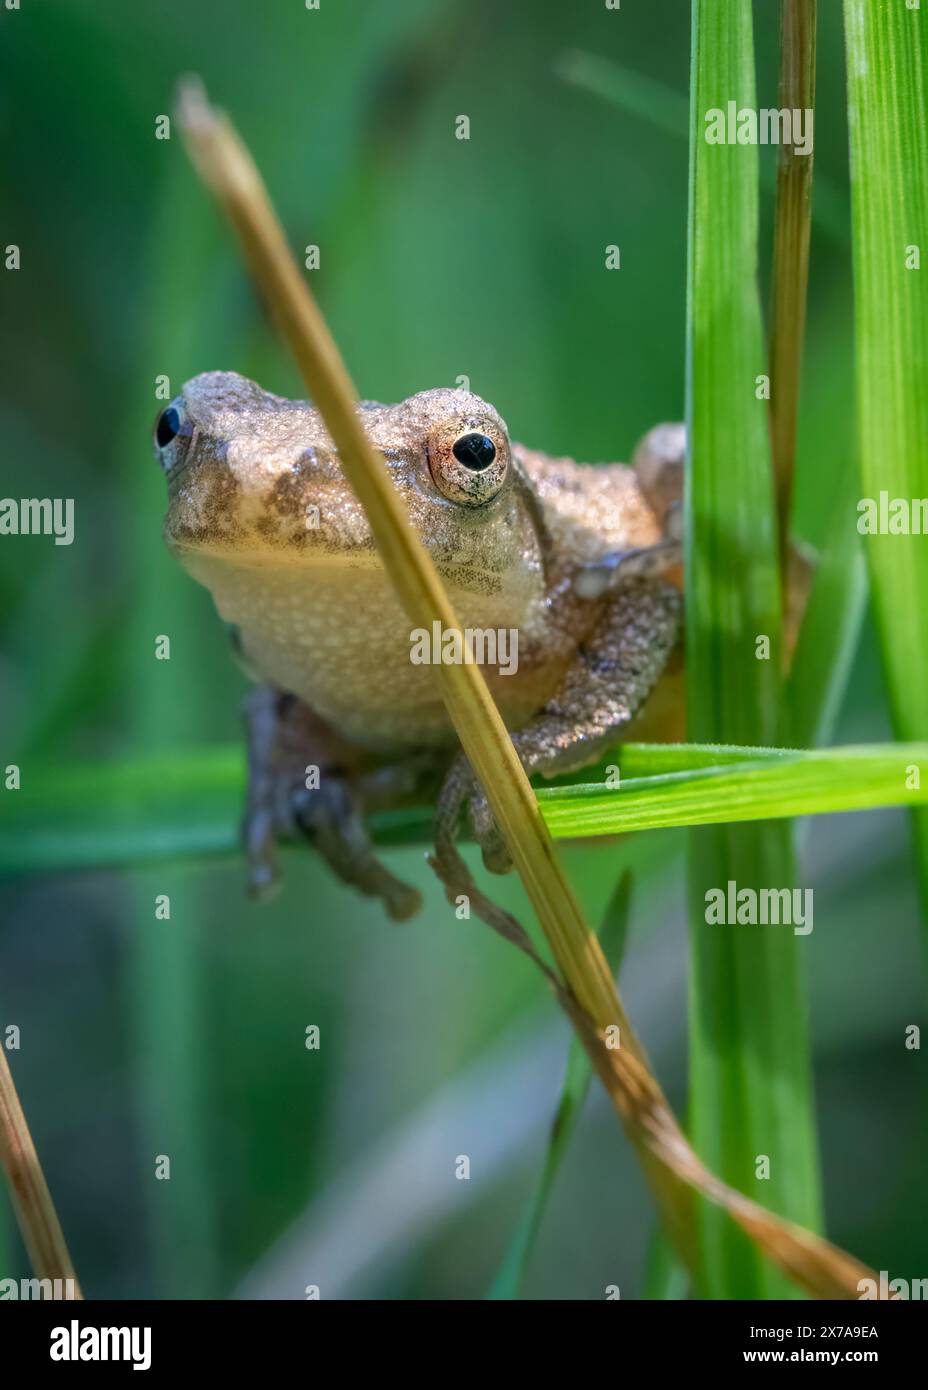 A small spring peeper, a tiny frog no larger than a thumb, clings to a blade of grass with delicate precision. Stock Photo